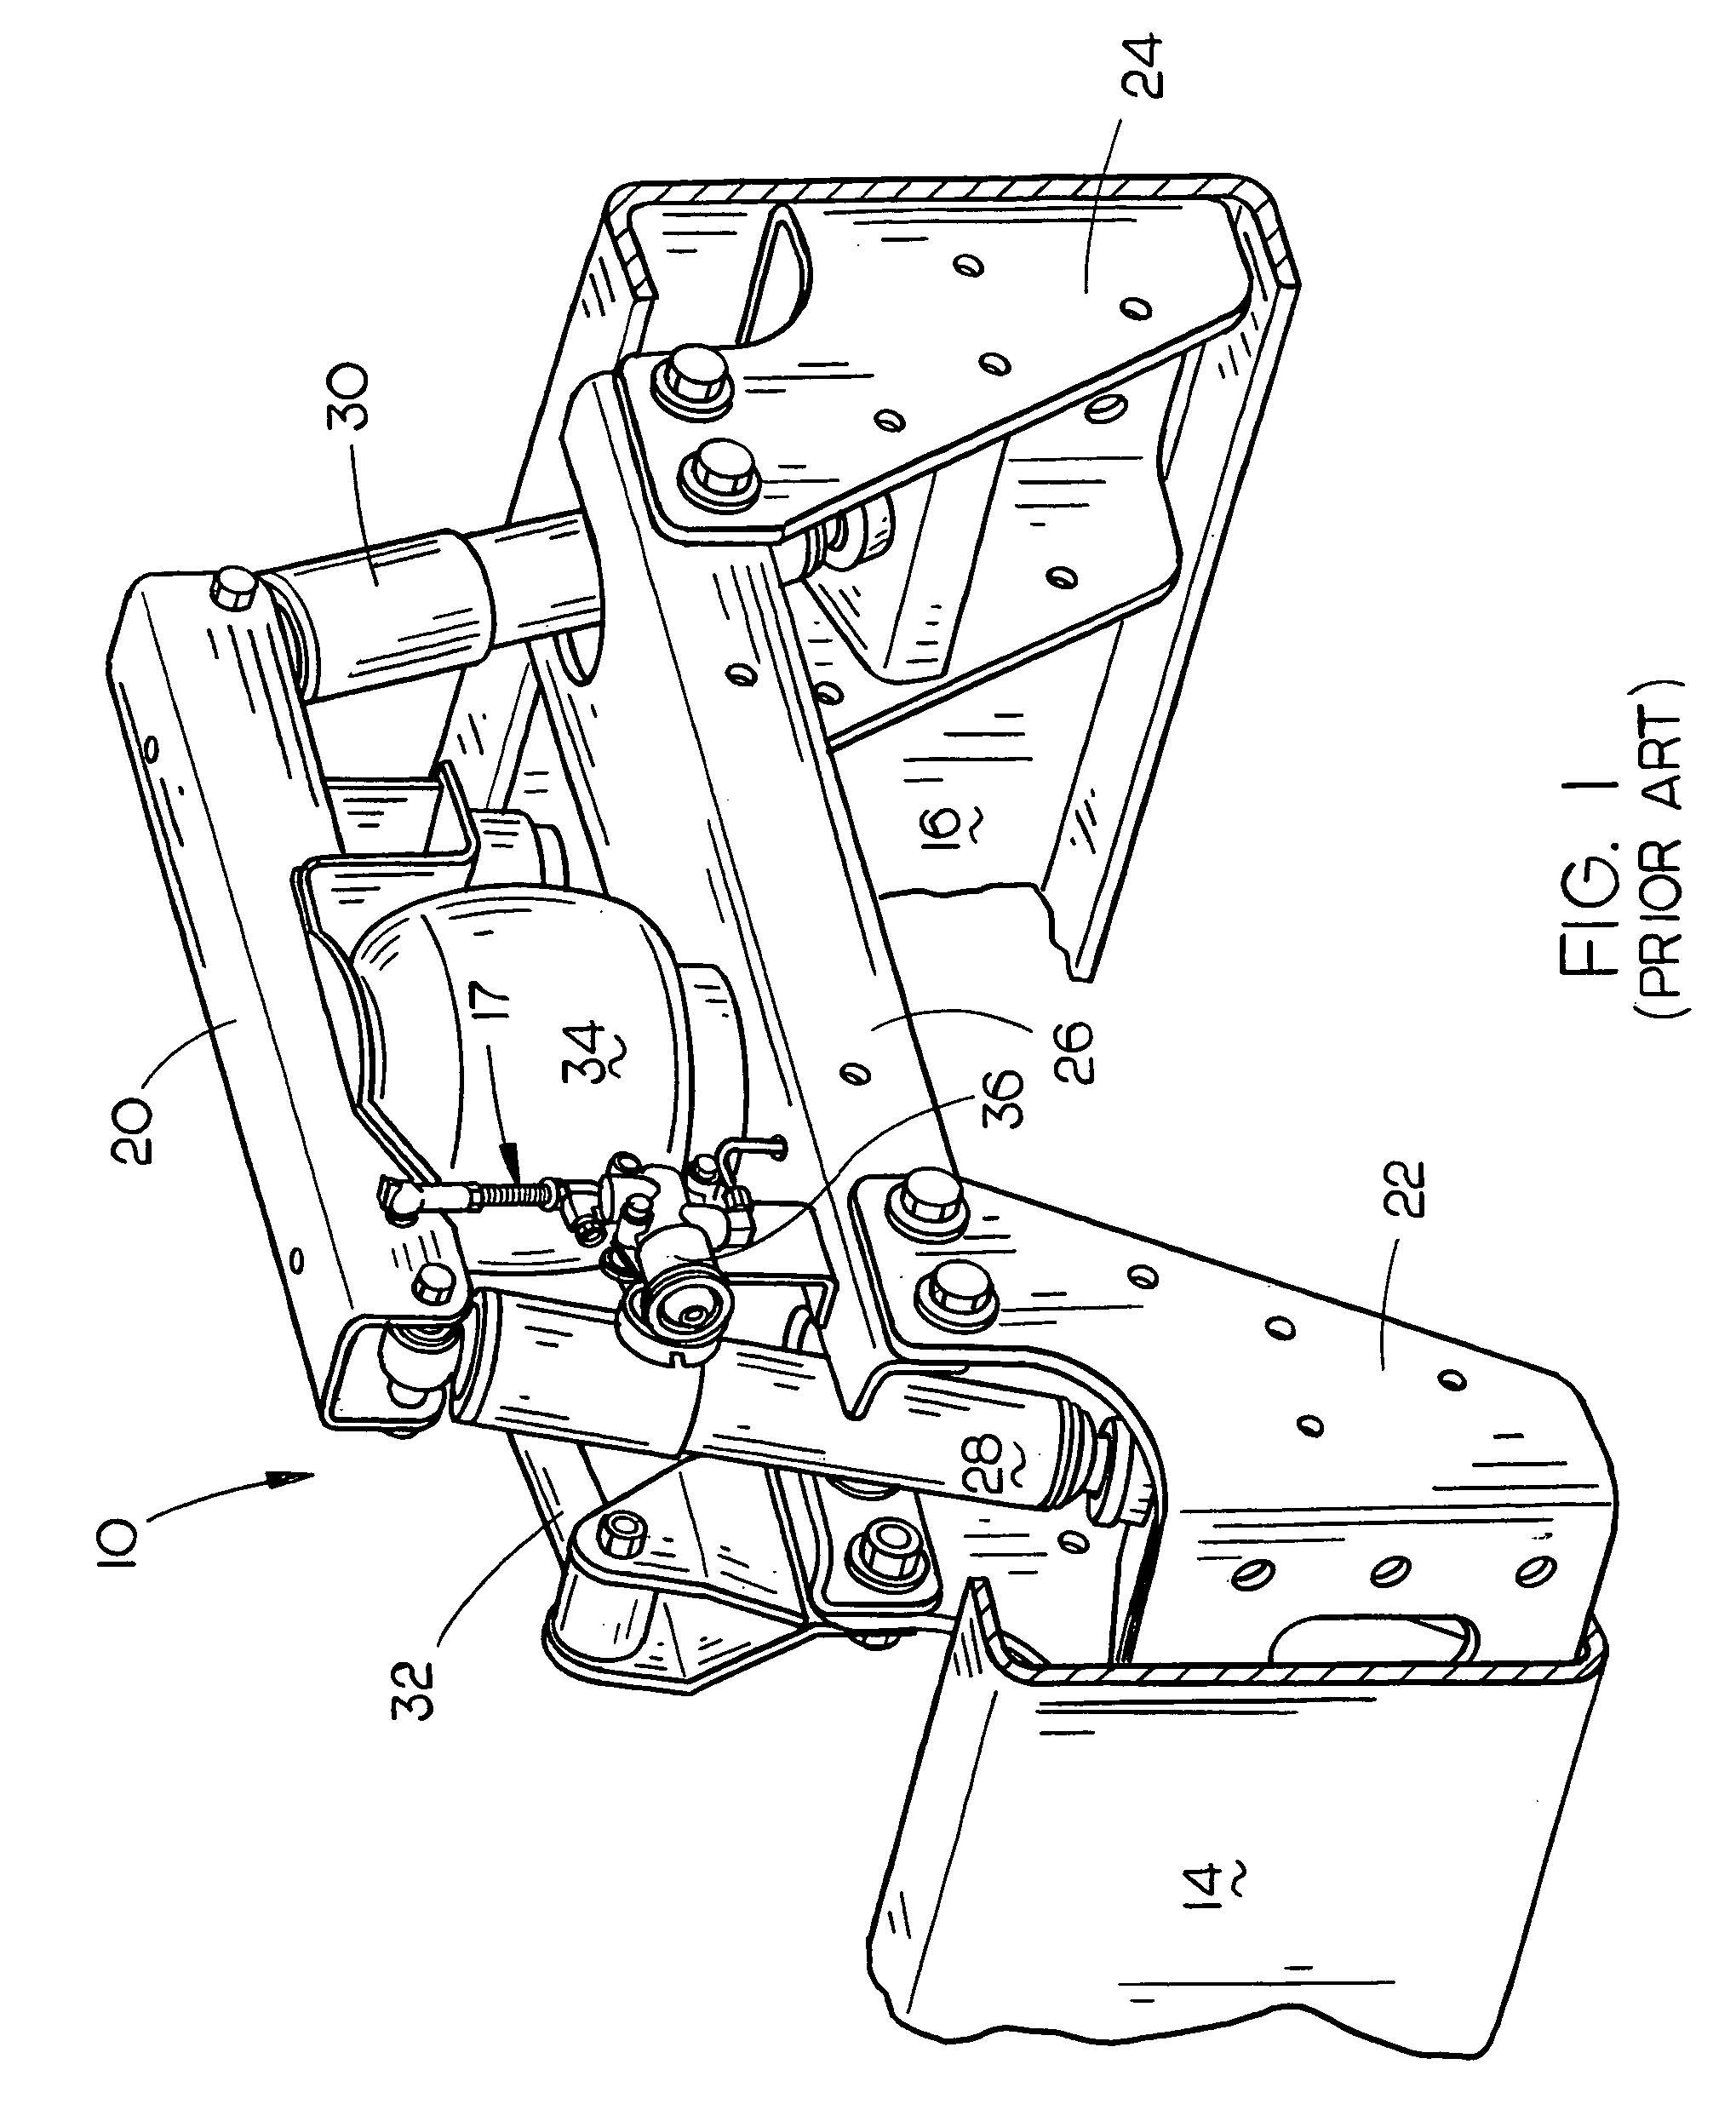 Height control linkage for a vehicle cab suspension